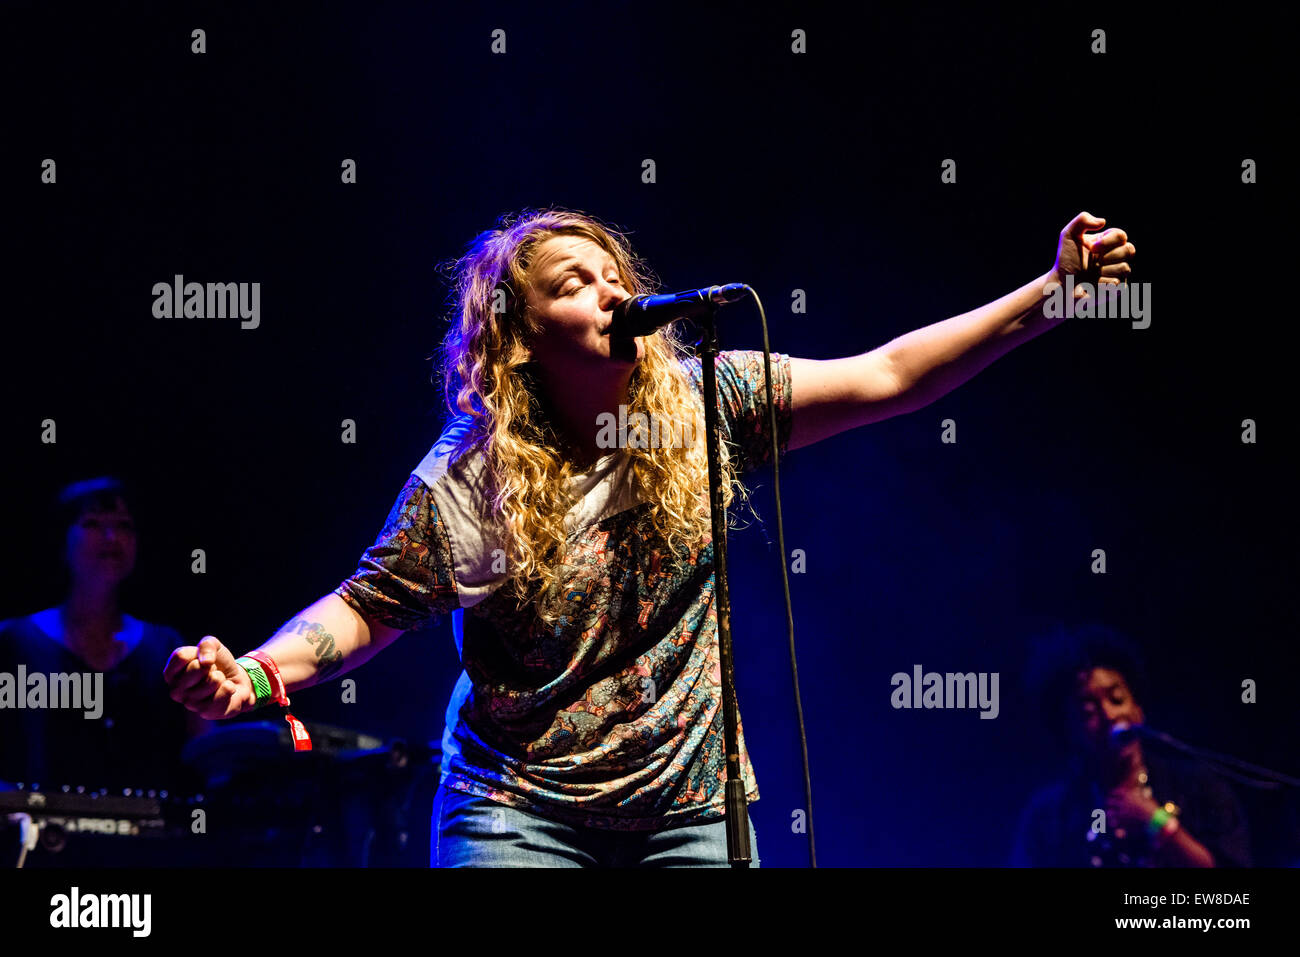 Barcelona, Catalonia, Spain. 19th June, 2015. KATE TEMPEST, Britain's leading young poet, playwright and rapper, is live on stage with her spoken-word performance at the 22nd Sonar Barcelona Credit:  Matthias Oesterle/ZUMA Wire/ZUMAPRESS.com/Alamy Live News Stock Photo